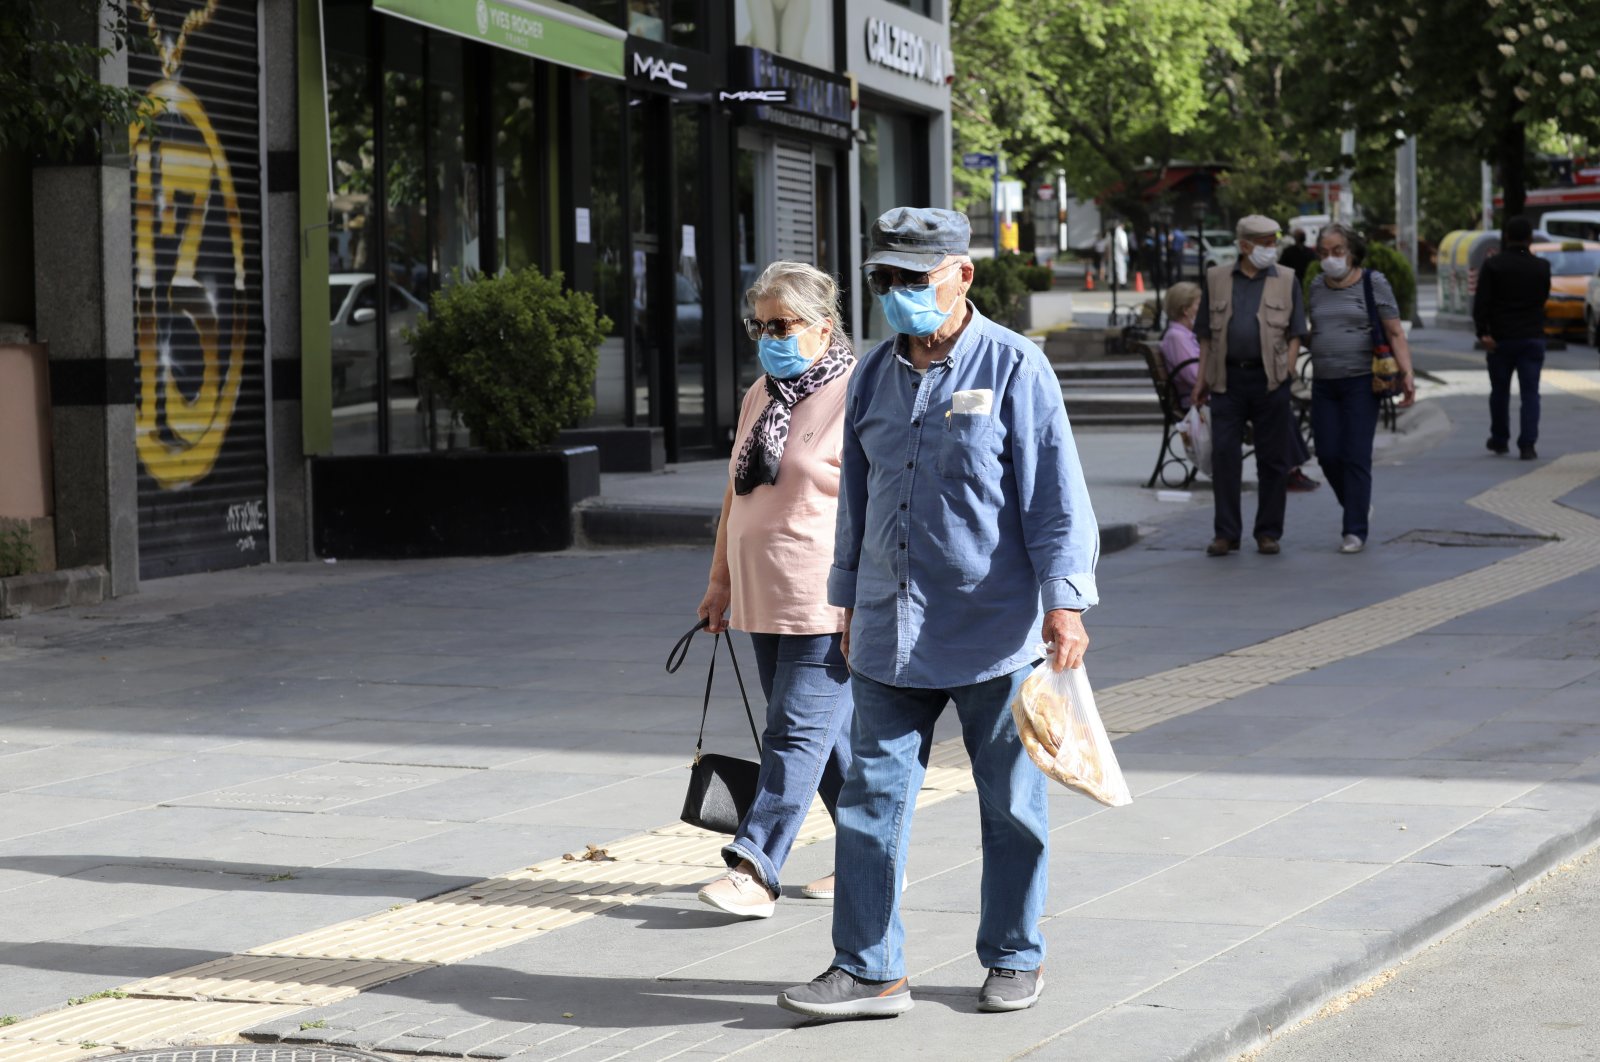 People wearing face masks for protection against coronavirus, walk in popular Tunali Hilmi Street during a four-day curfew declared by the government in an attempt to control the spread of coronavirus, in Ankara, Turkey, Sunday, May 17, 2020. (AP Photo)